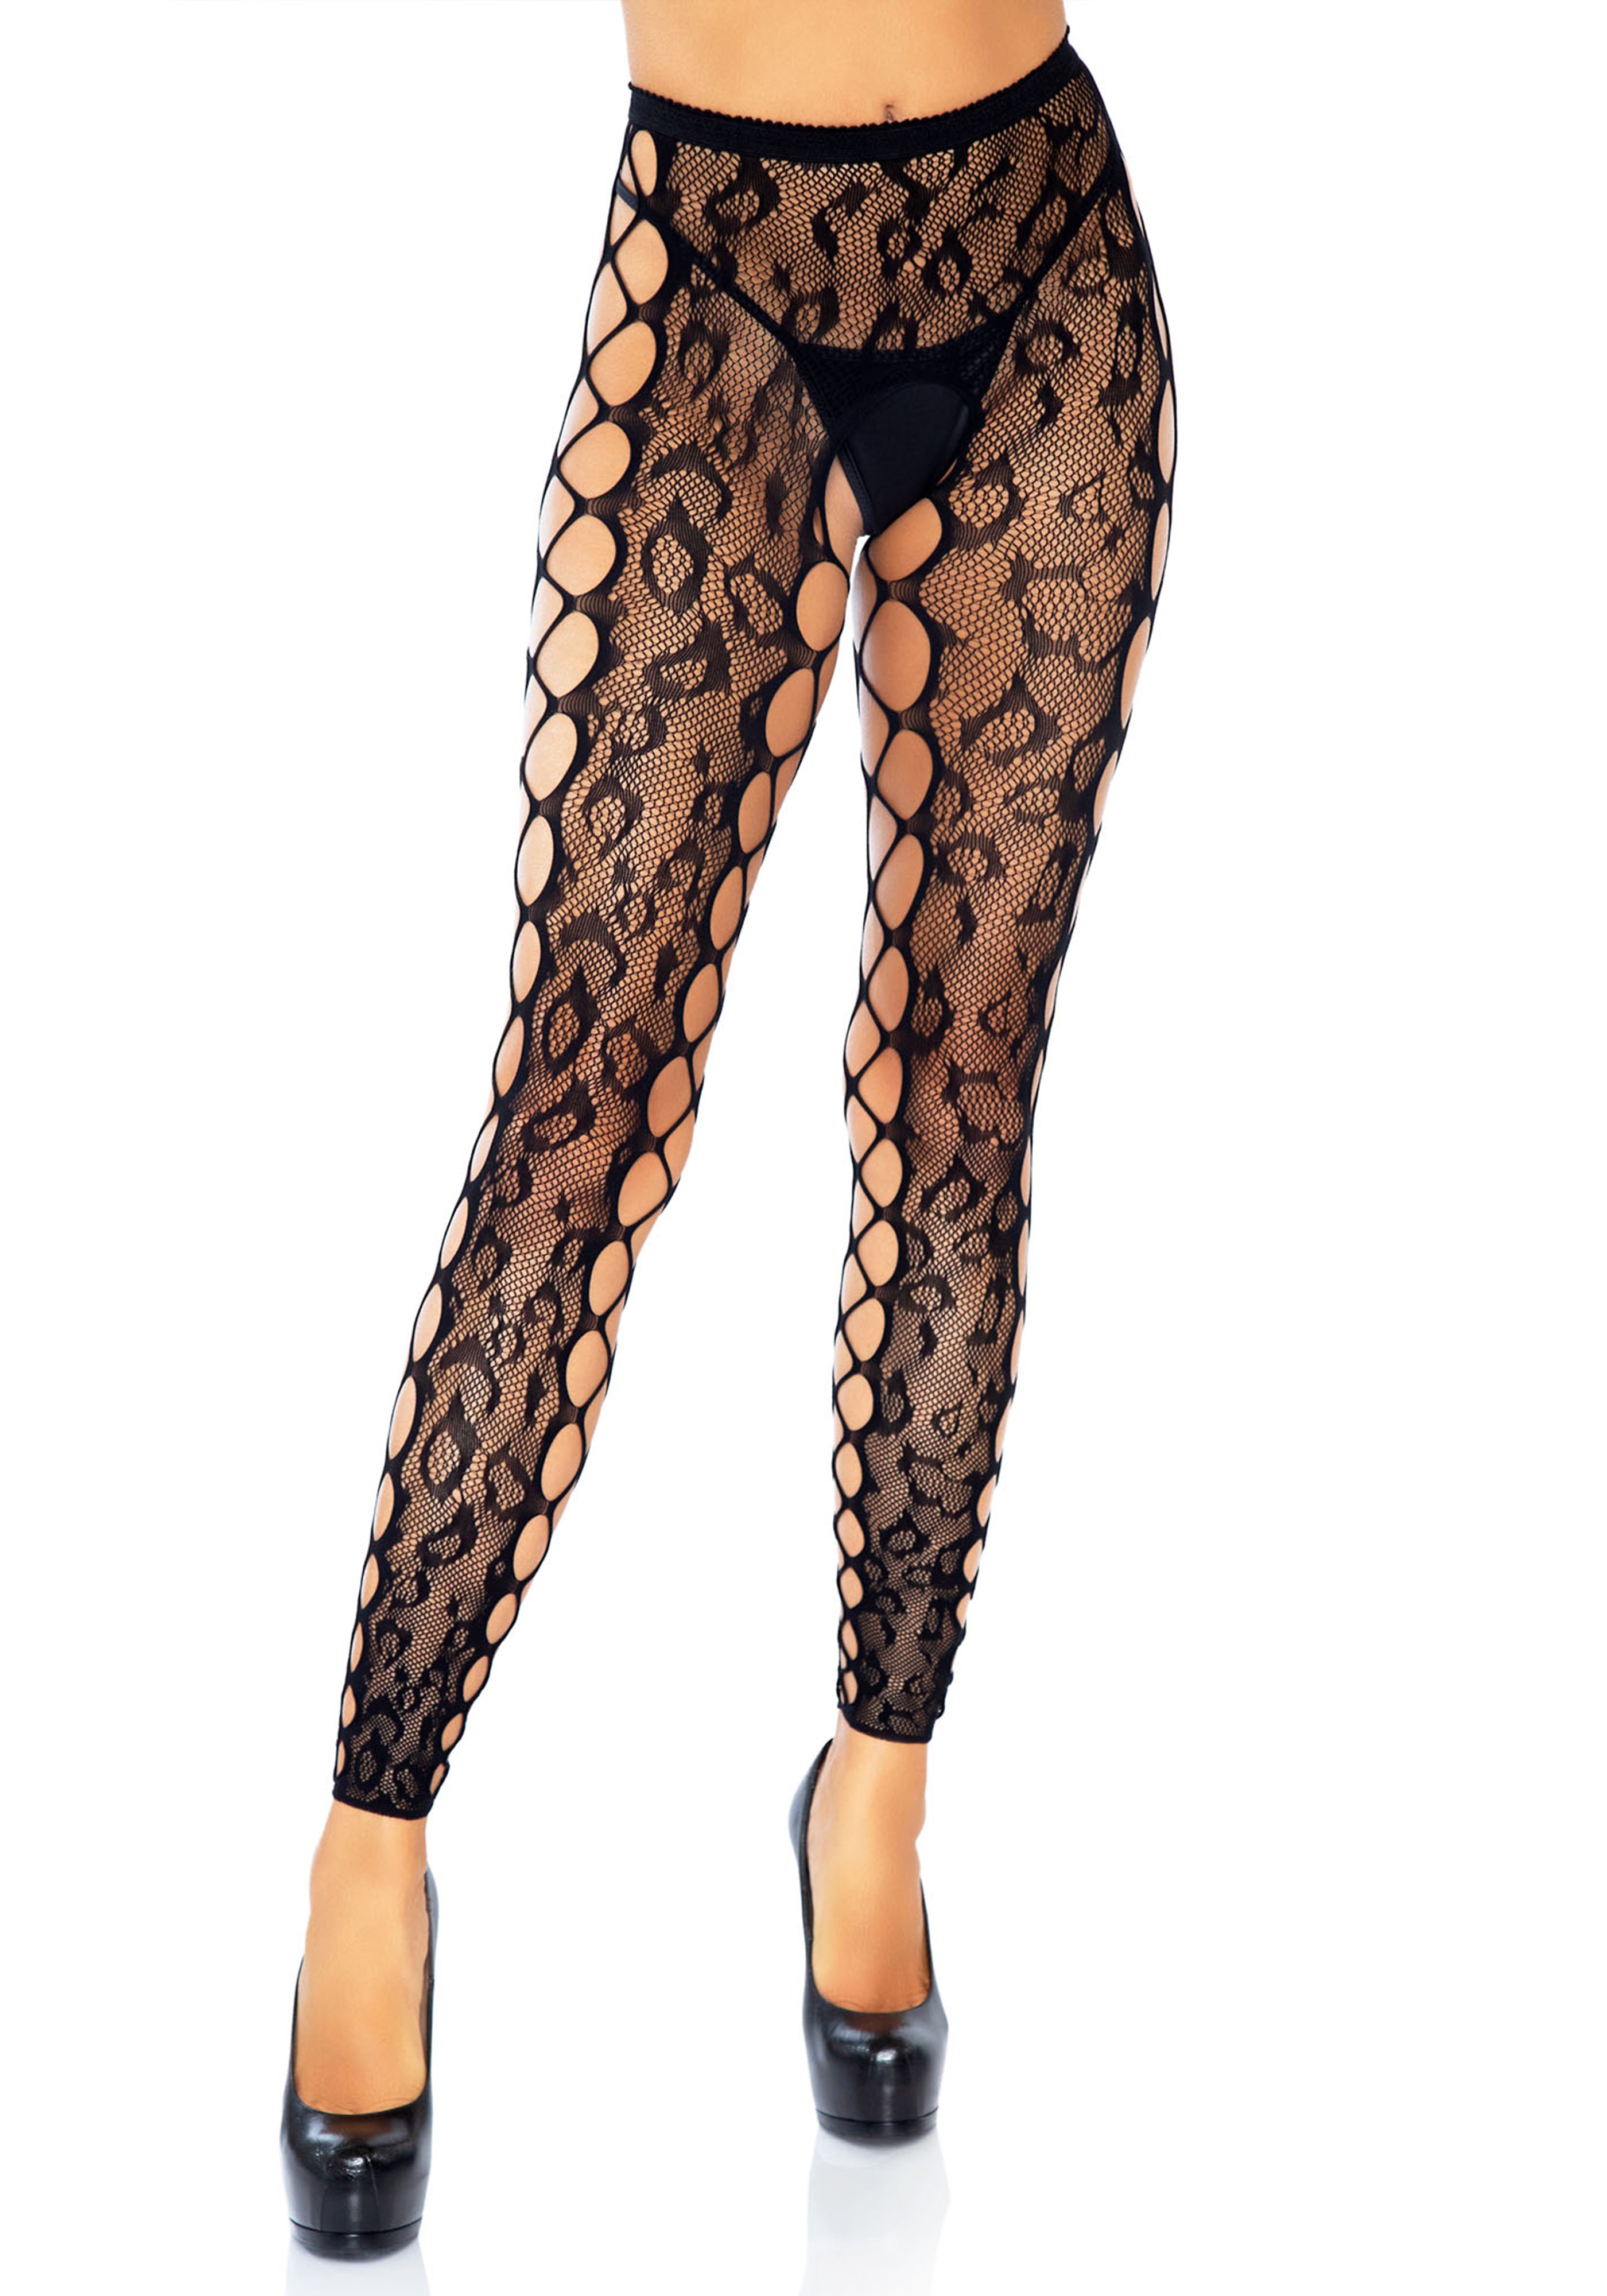 Leg Avenue 7812 Footless crotchless tights